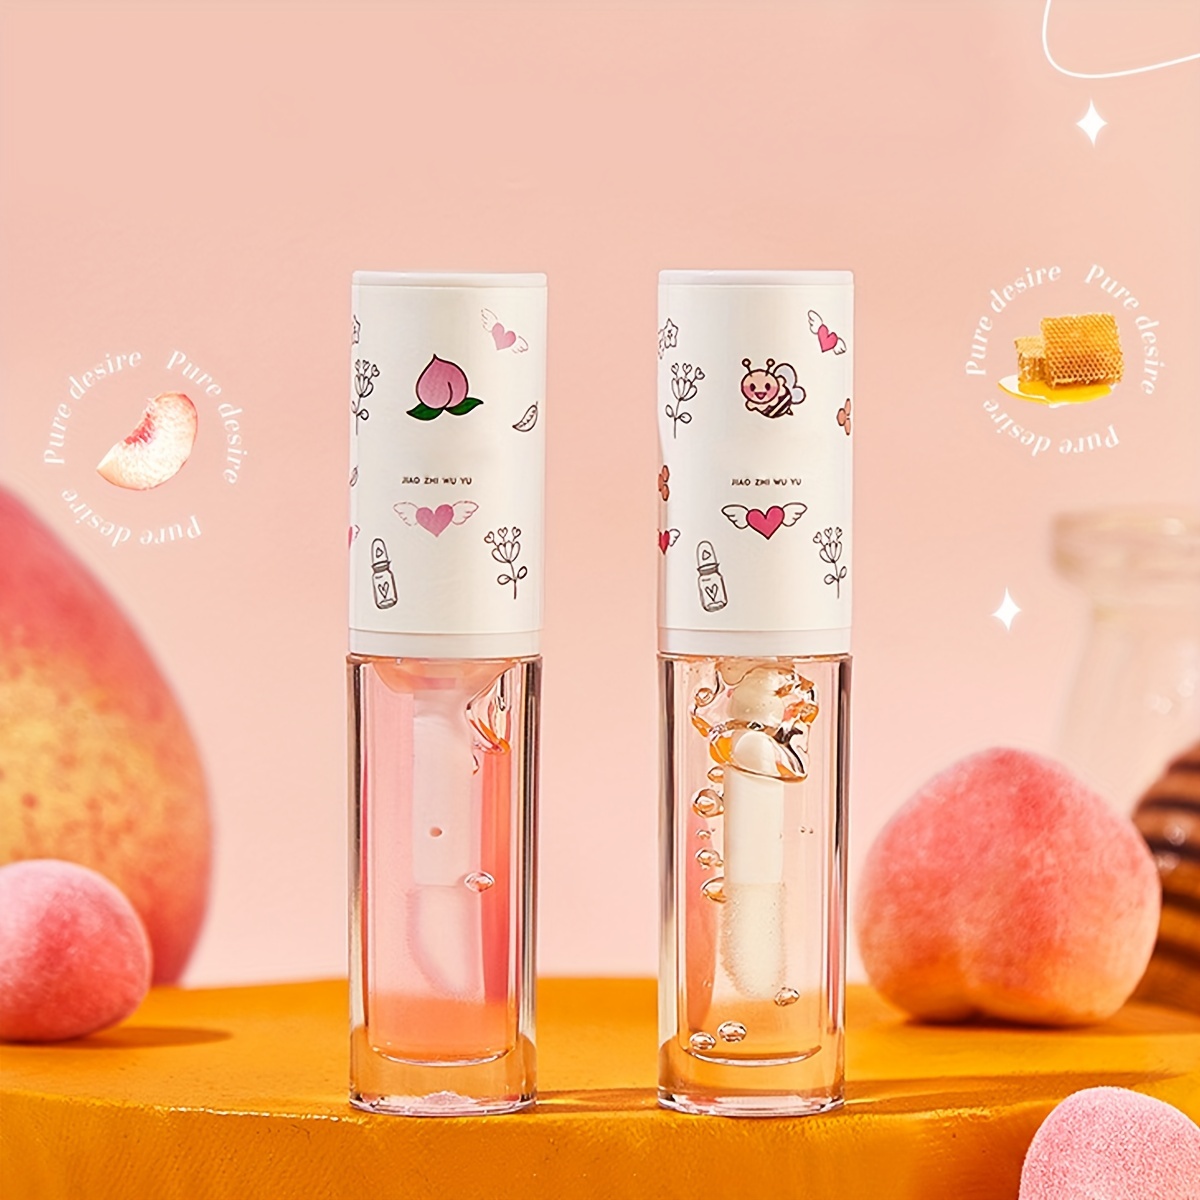 Peach Honey Lip Oil Soft Lip Care Lotion Film Forming Lip Primer Hydrating  Anti Cracking Transparent Lip Balm Valentines Day Gifts, Discounts  Everyone